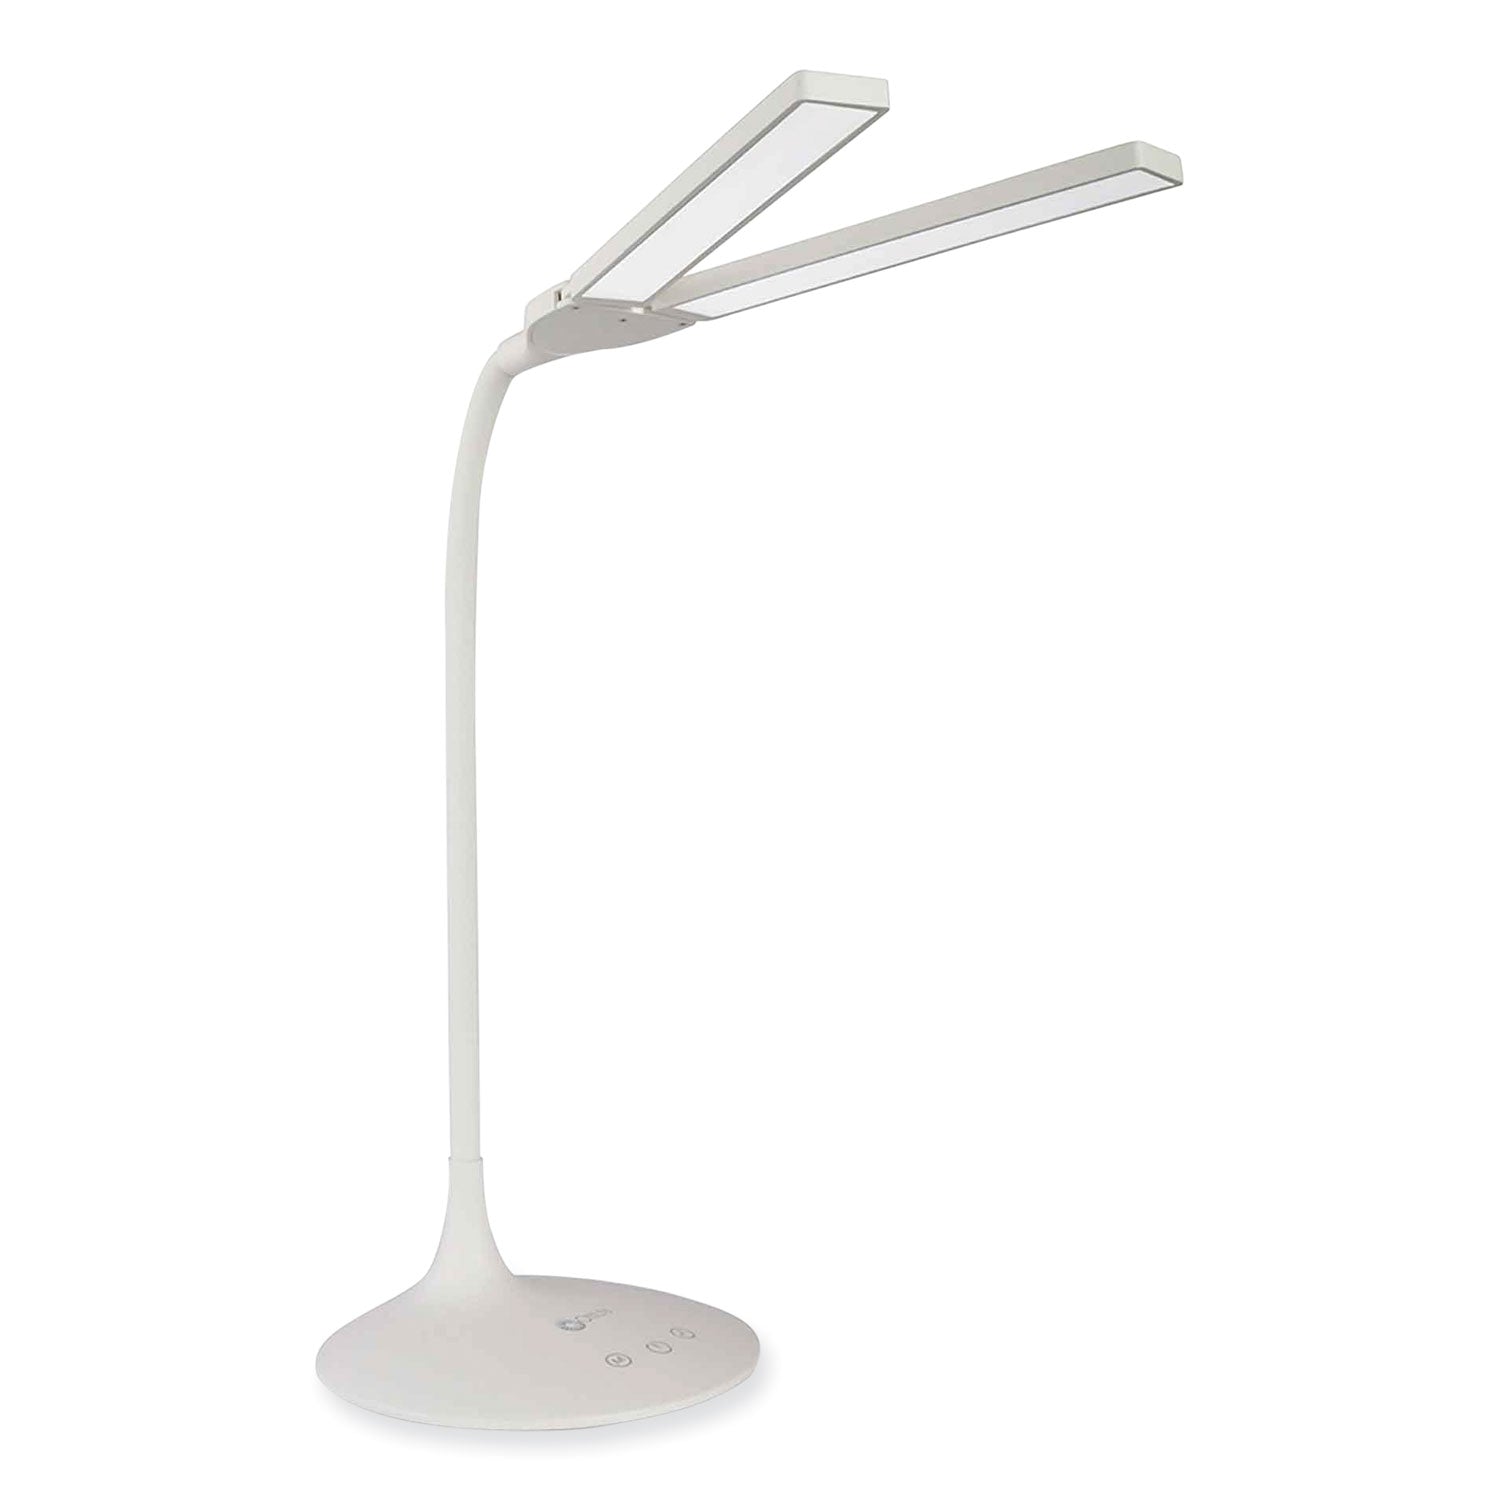 wellness-series-pivot-led-desk-lamp-with-dual-shades-1325-to-26-high-white-ships-in-4-6-business-days_ottcsn5900c - 1